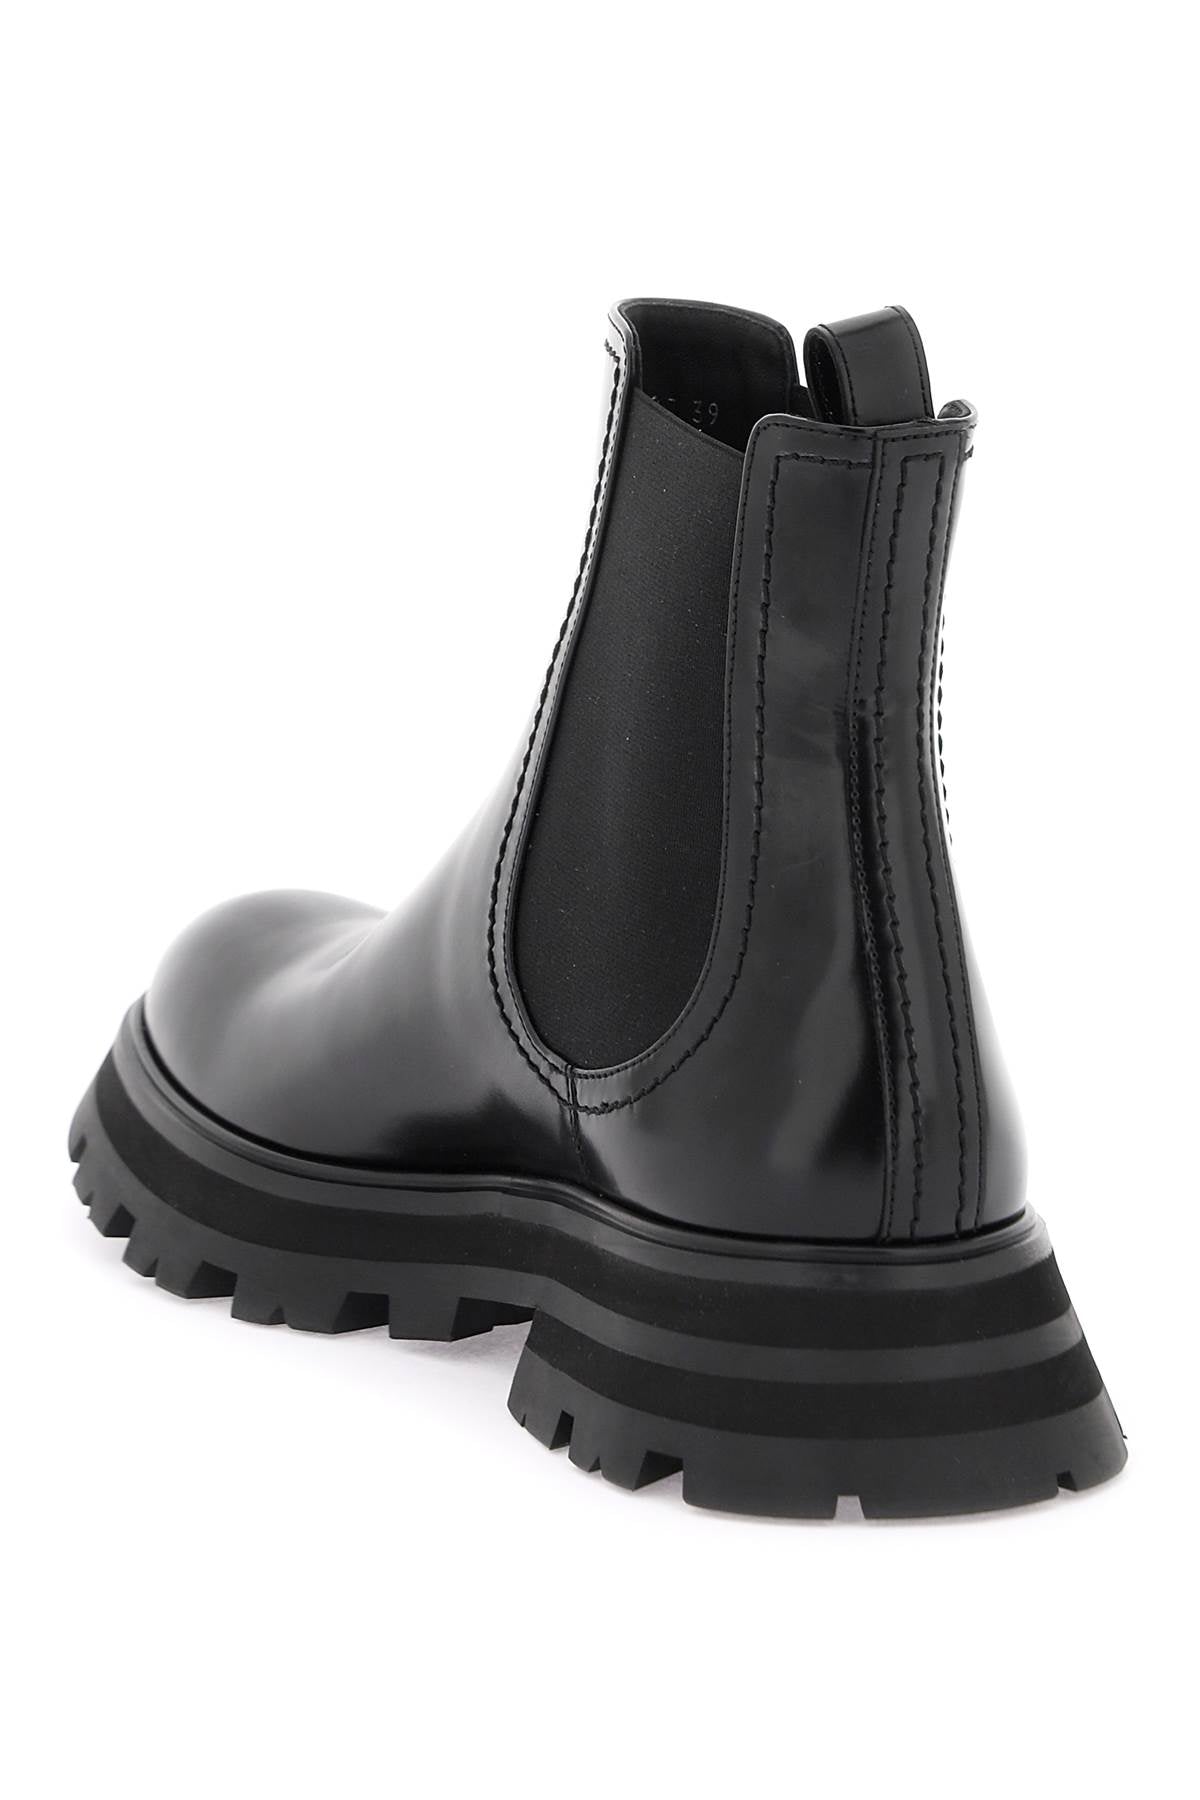 Alexander mcqueen shiny leather chelsea boots-2